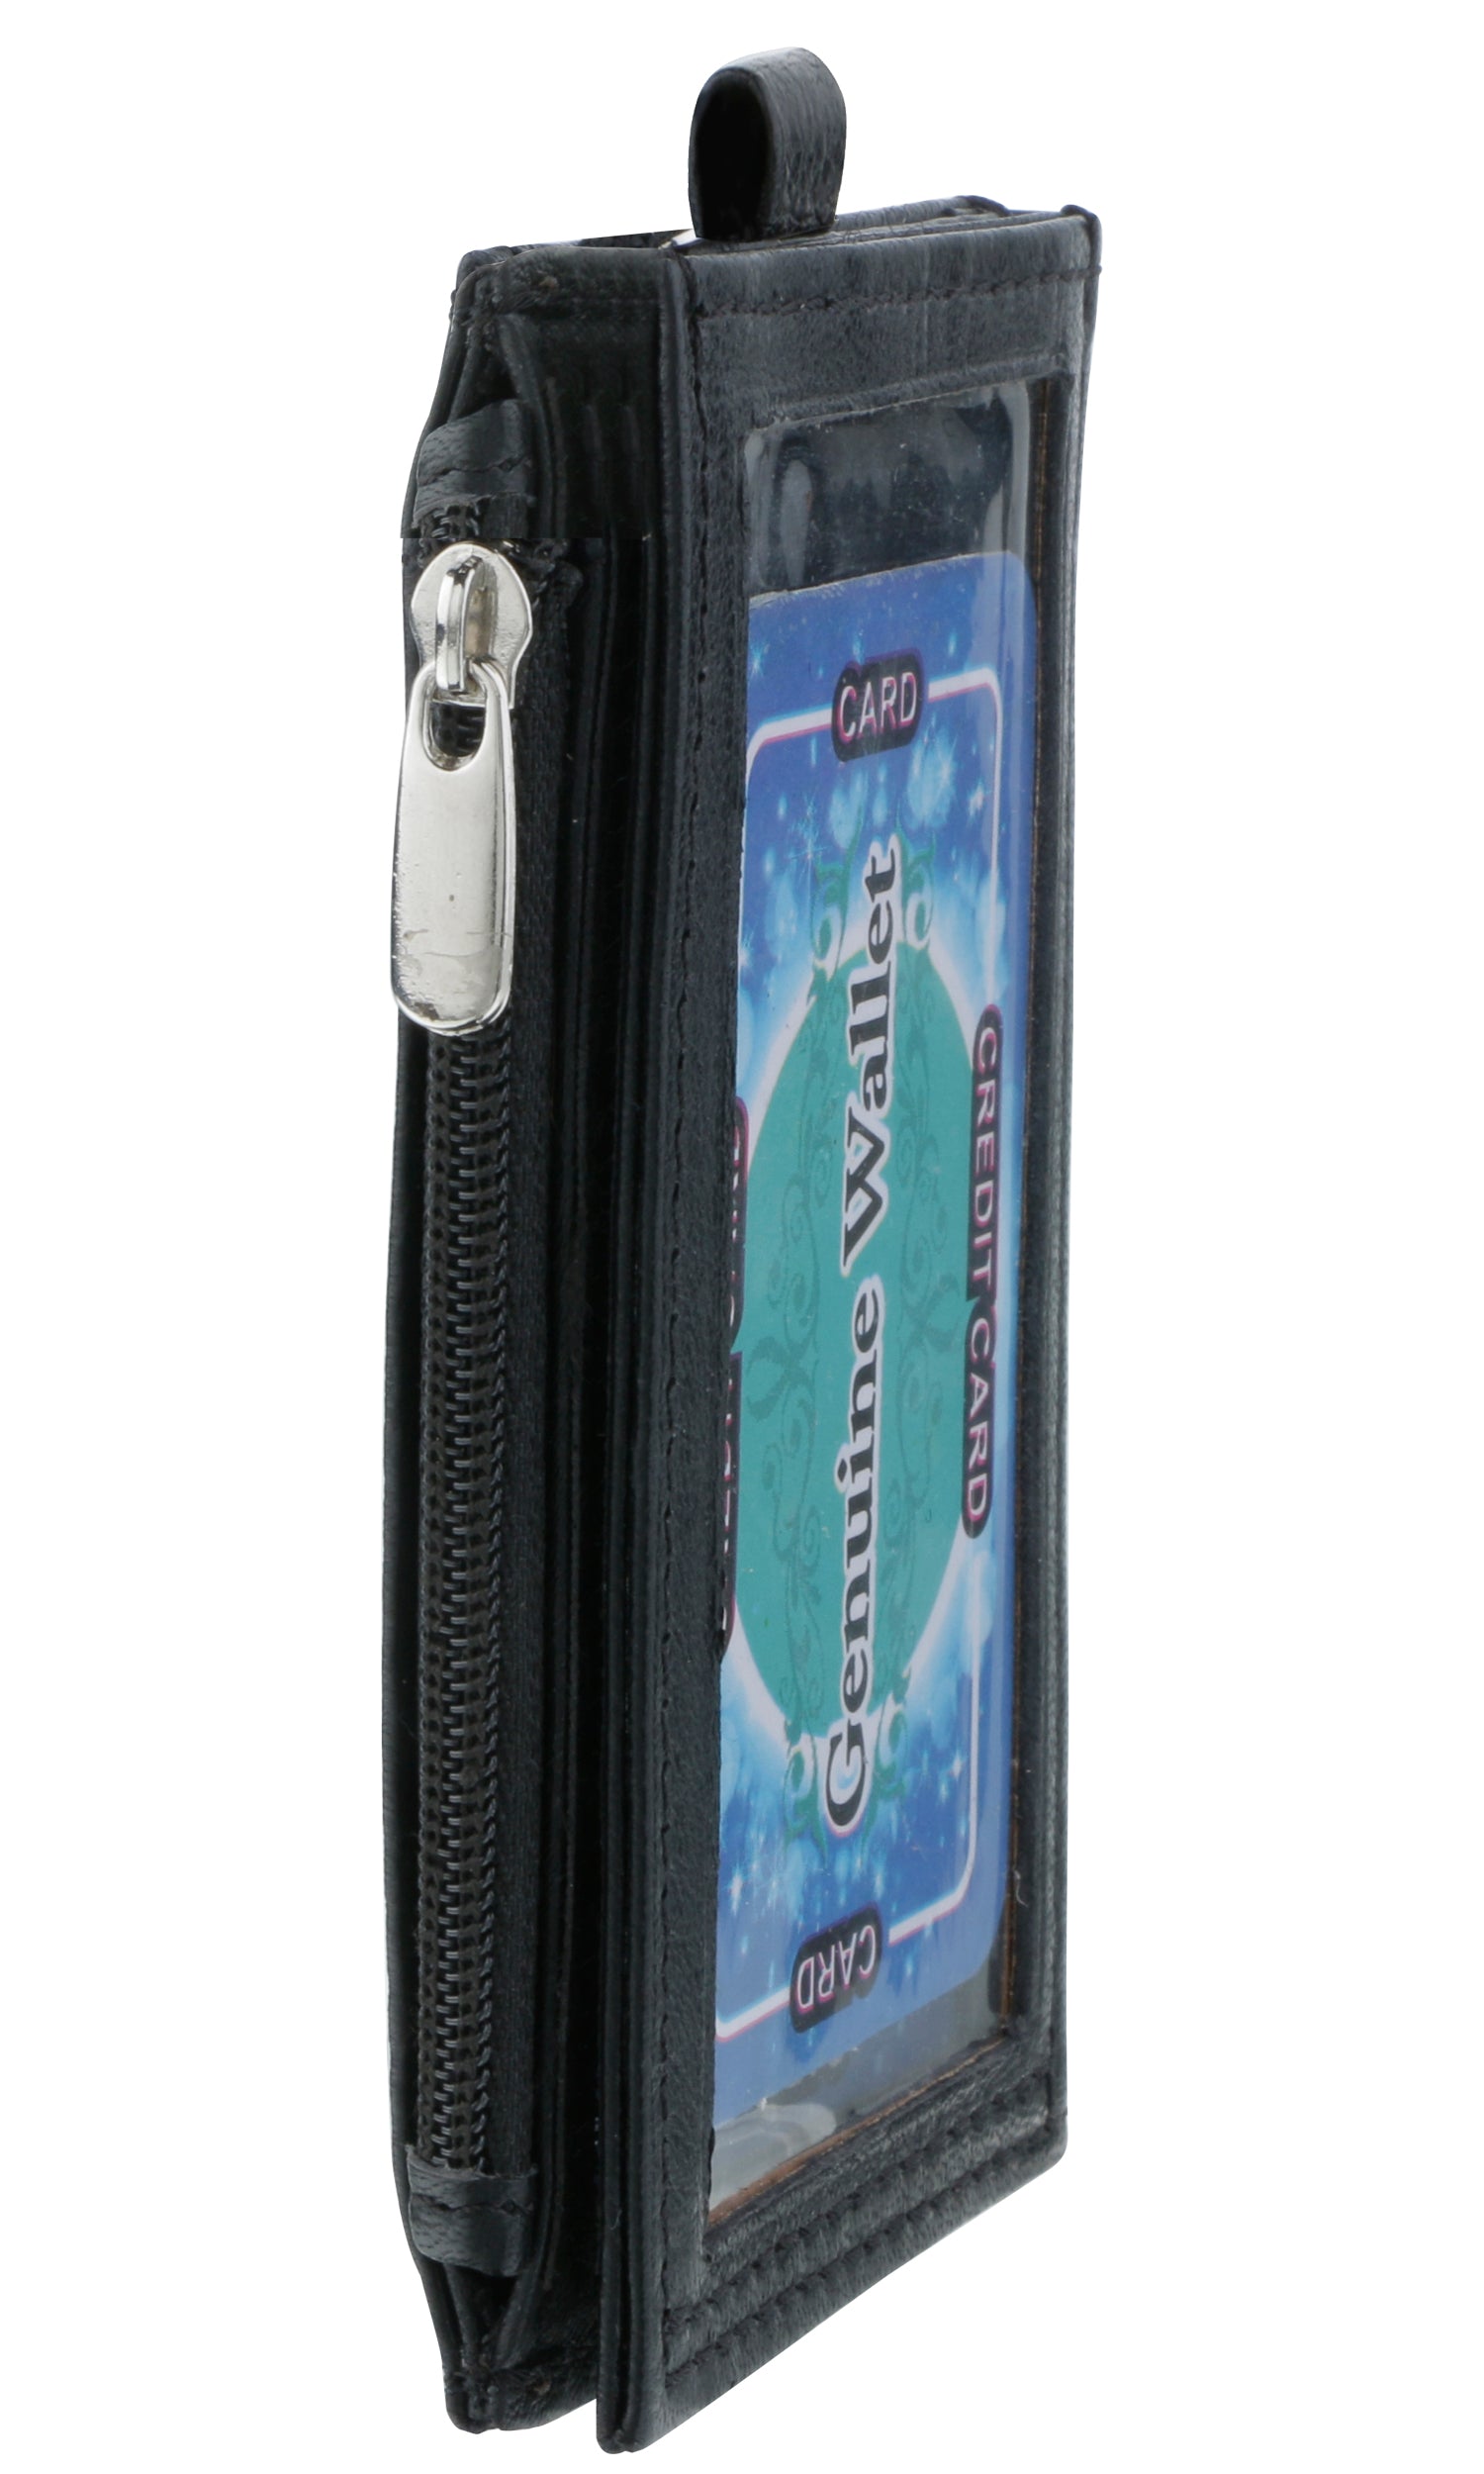 Side image of CLASSIC ID BADGE HOLDER. It is holding a ID within.